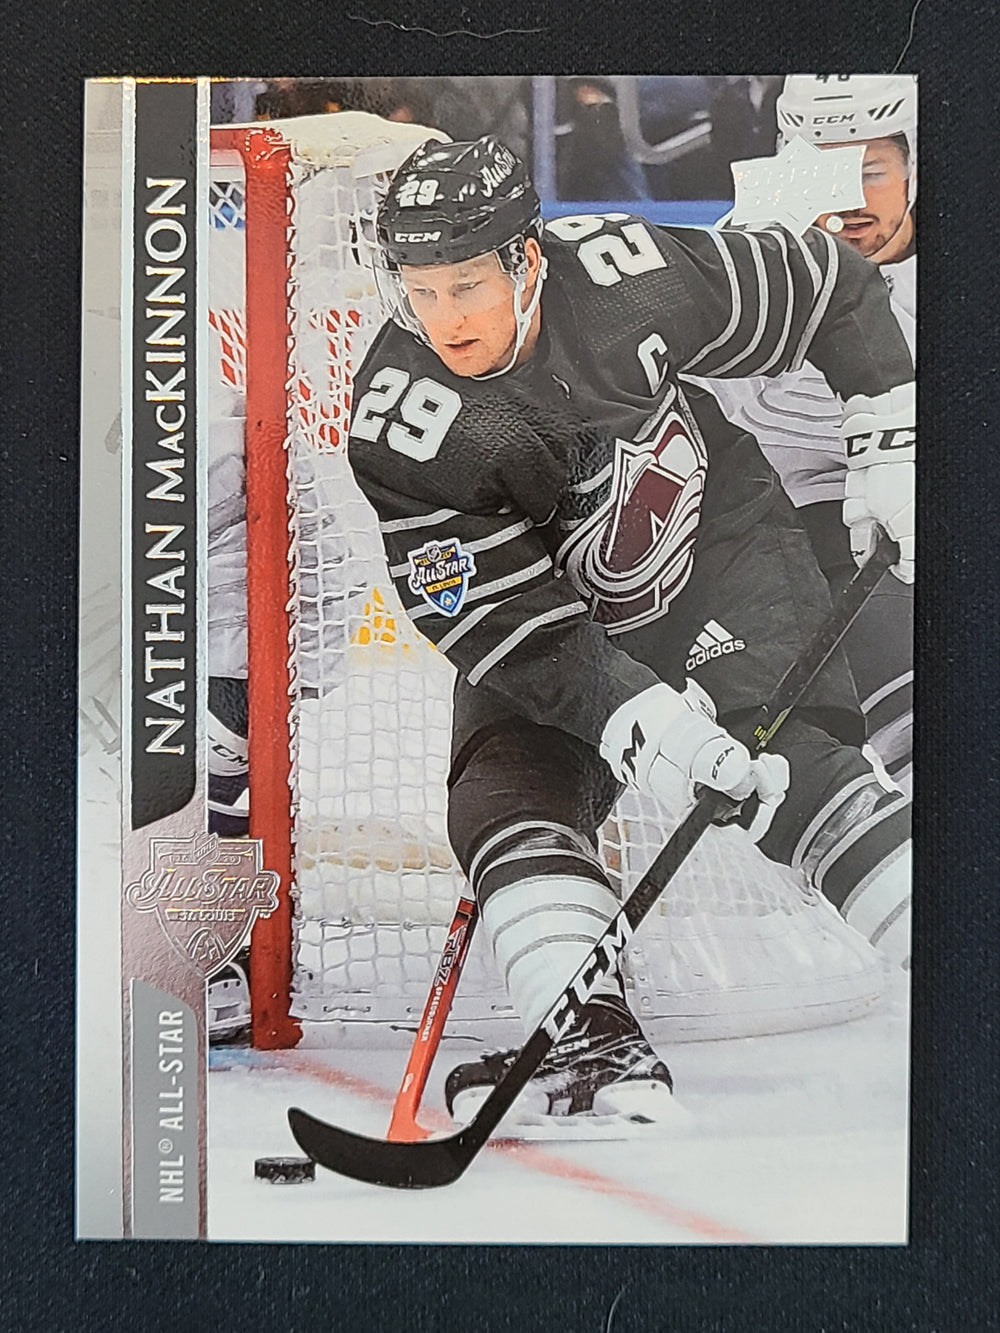 2020-21 Upper Deck Extended VARIANT #659 Nathan MacKinnon Colorado Avalanche SSP